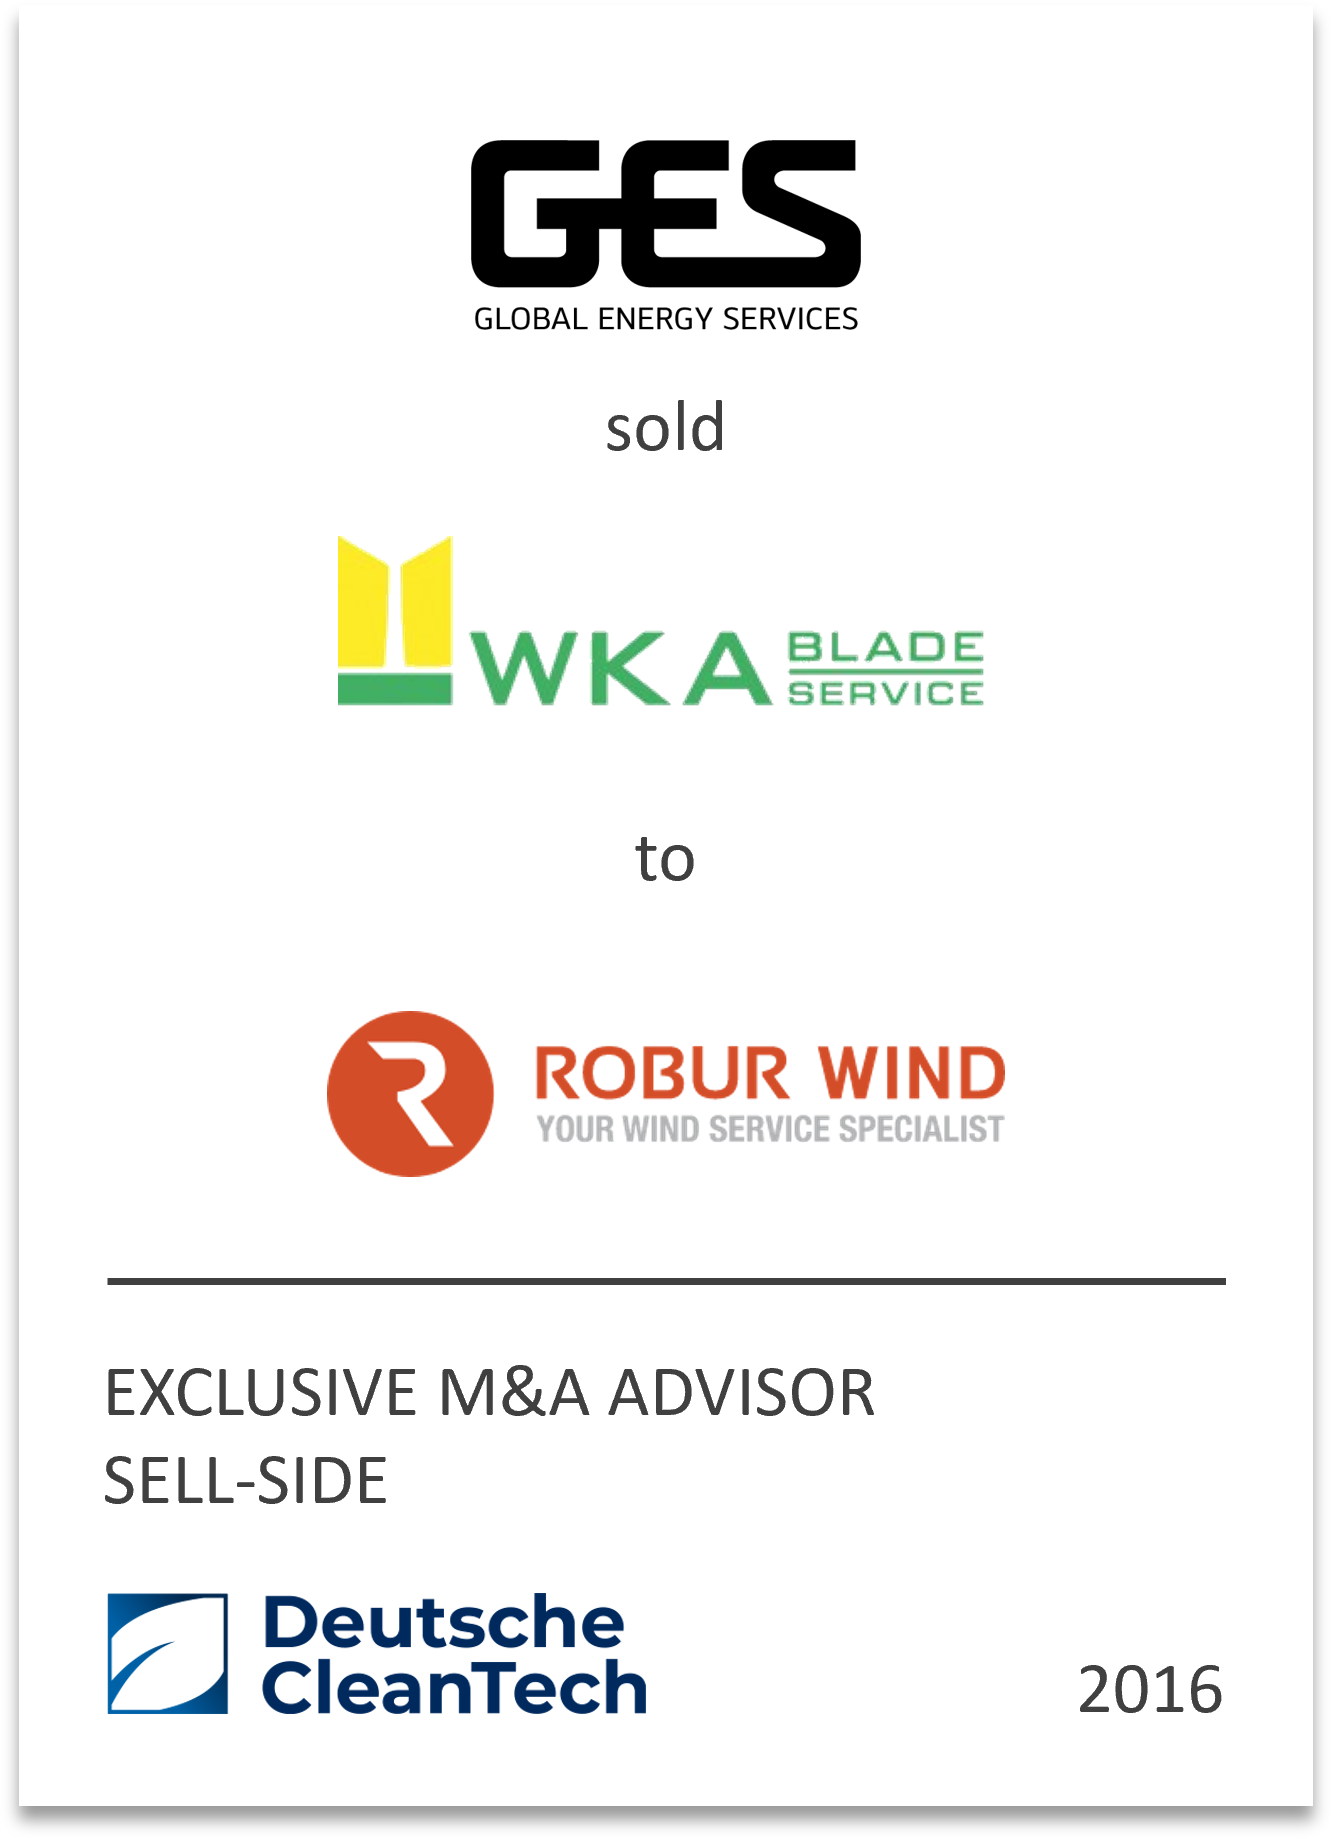 ROBUR Industry Service GmbH, a Germany-based company engaged in providing industrial and technical services, has acquired WKA Blade Service GmbH